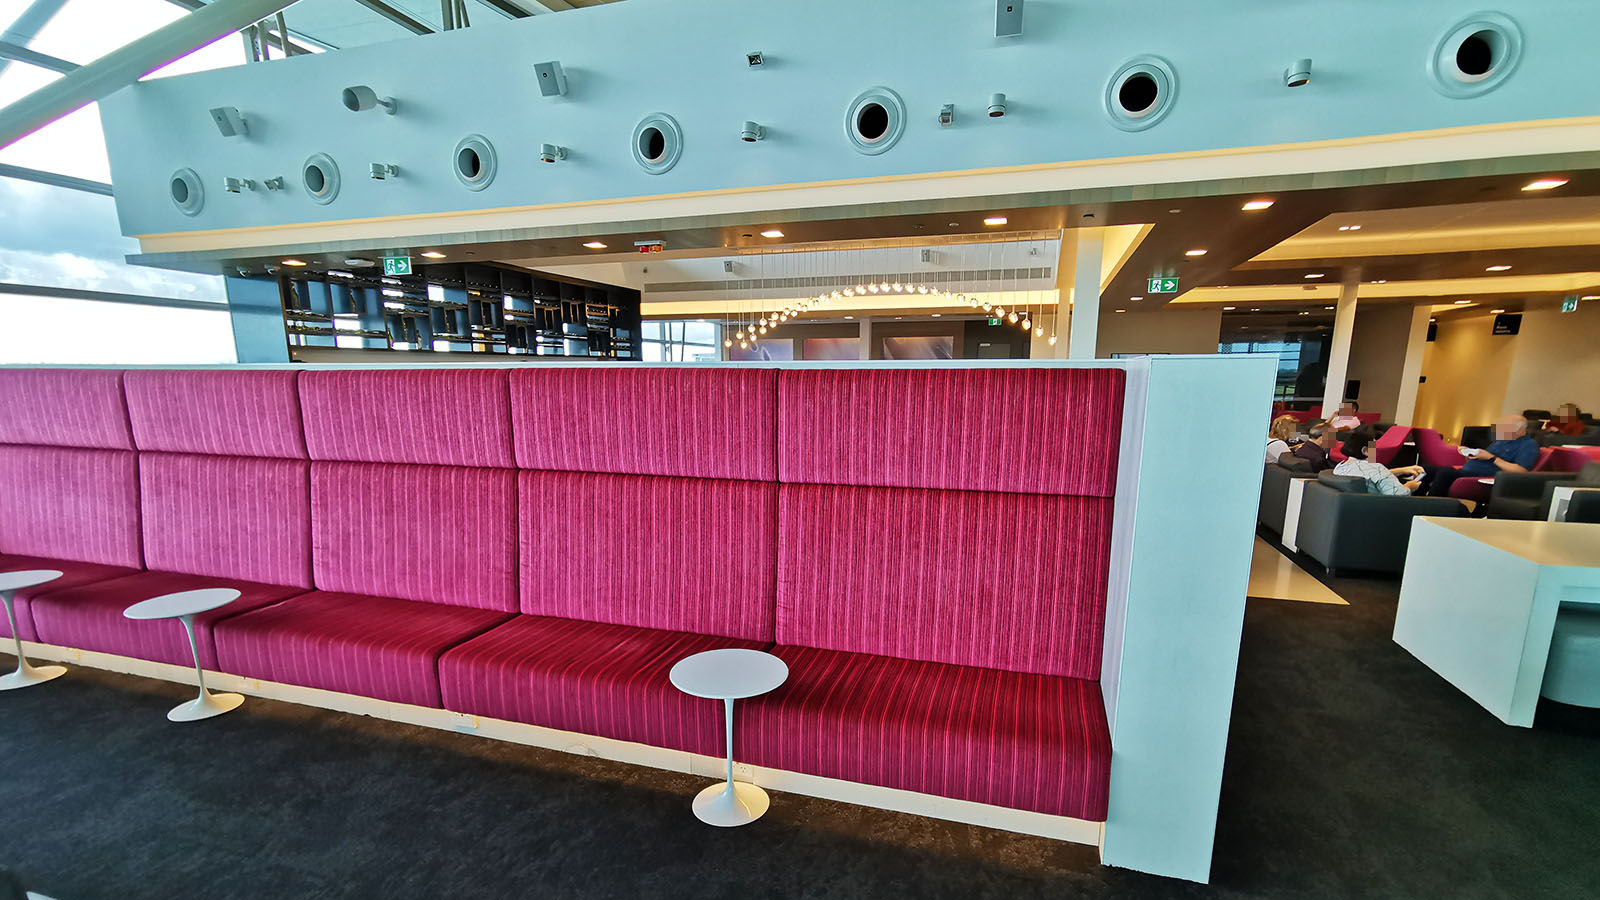 Fushia banquette chair at the Air New Zealand Business Premier lounge in Brisbane